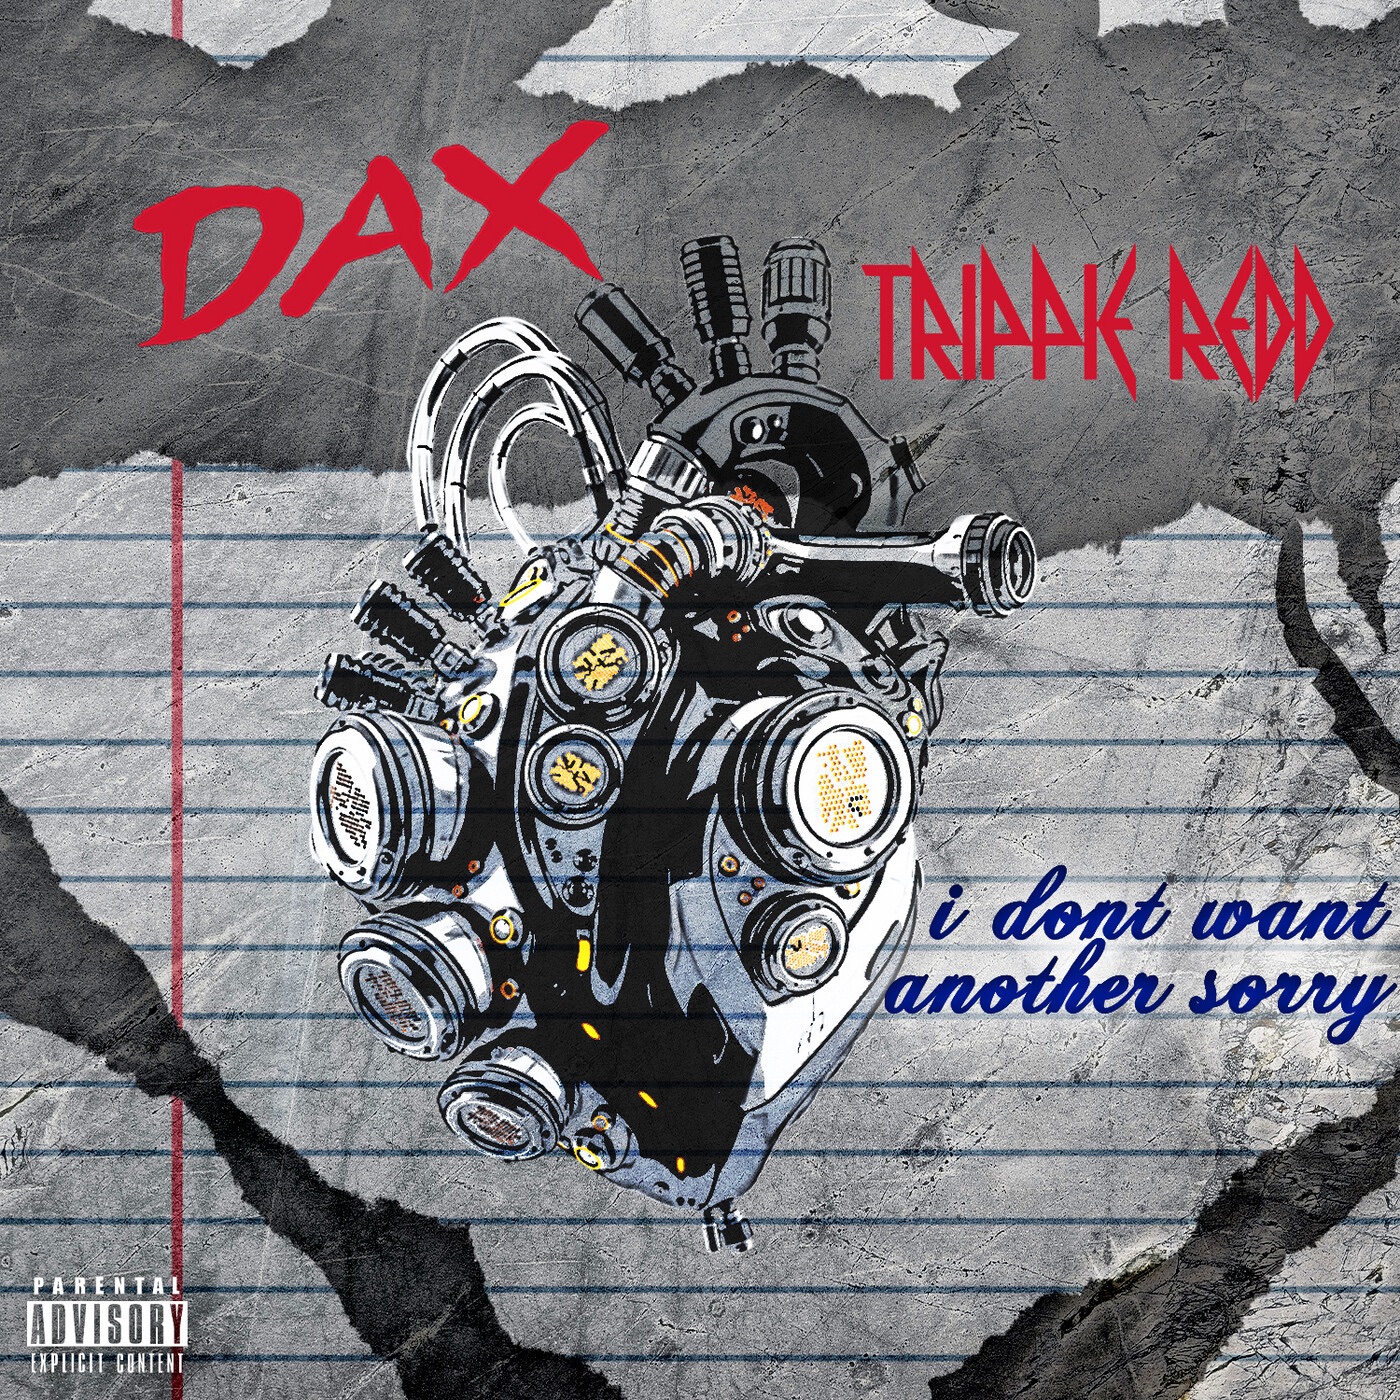 Dax & Trippie Redd - I Don't Want Another Sorry - Single